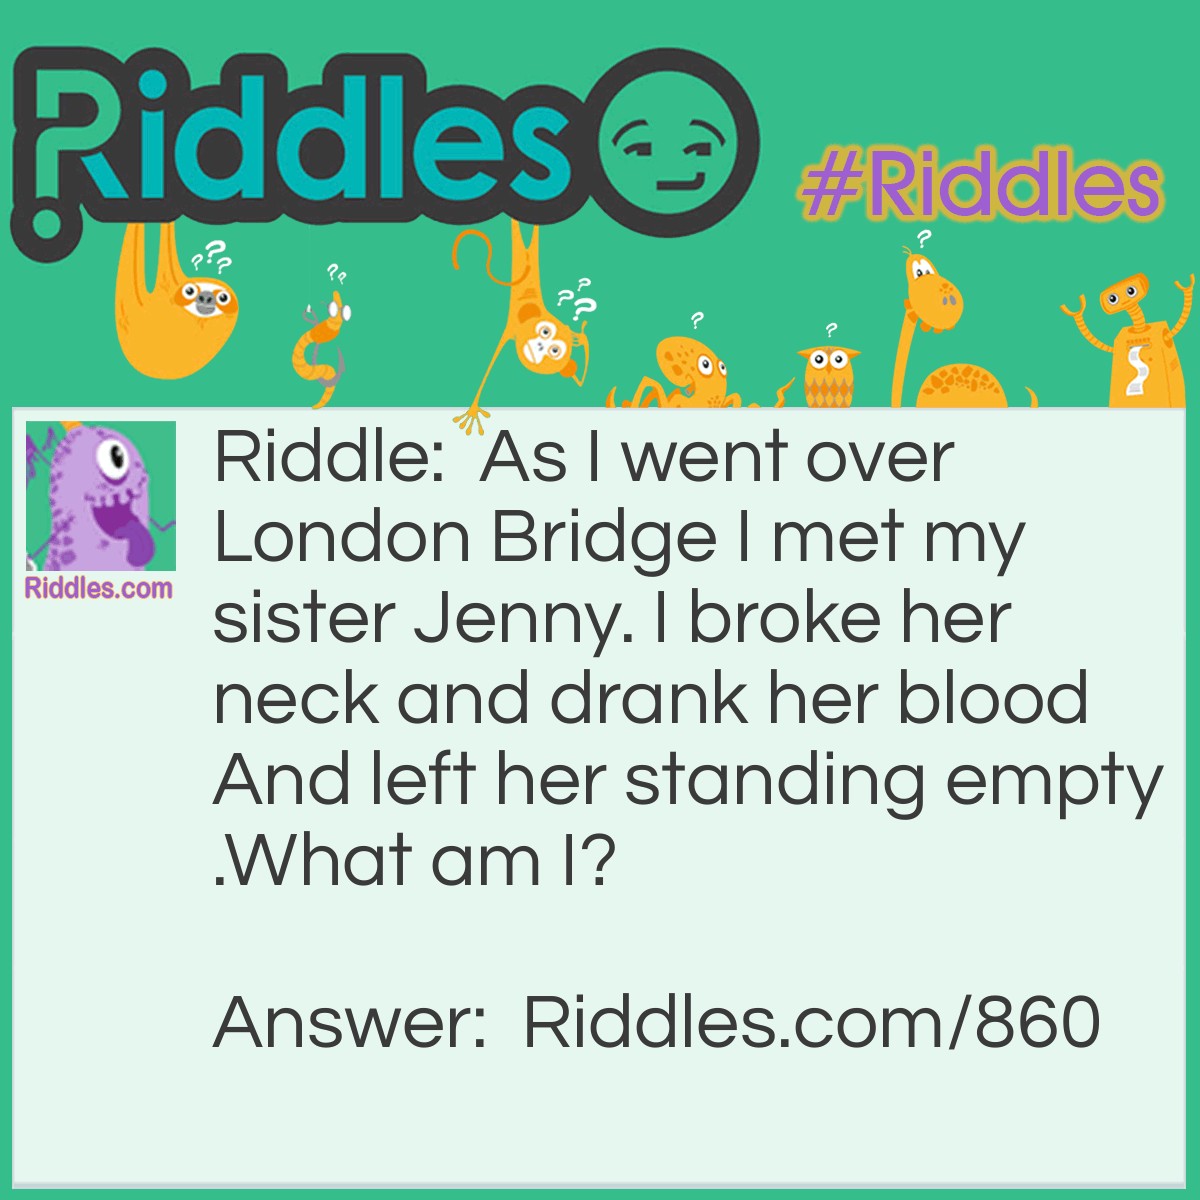 Riddle: As I went over London Bridge I met my sister Jenny. I broke her neck and drank her blood And left her standing empty.
What am I? Answer: Gin.